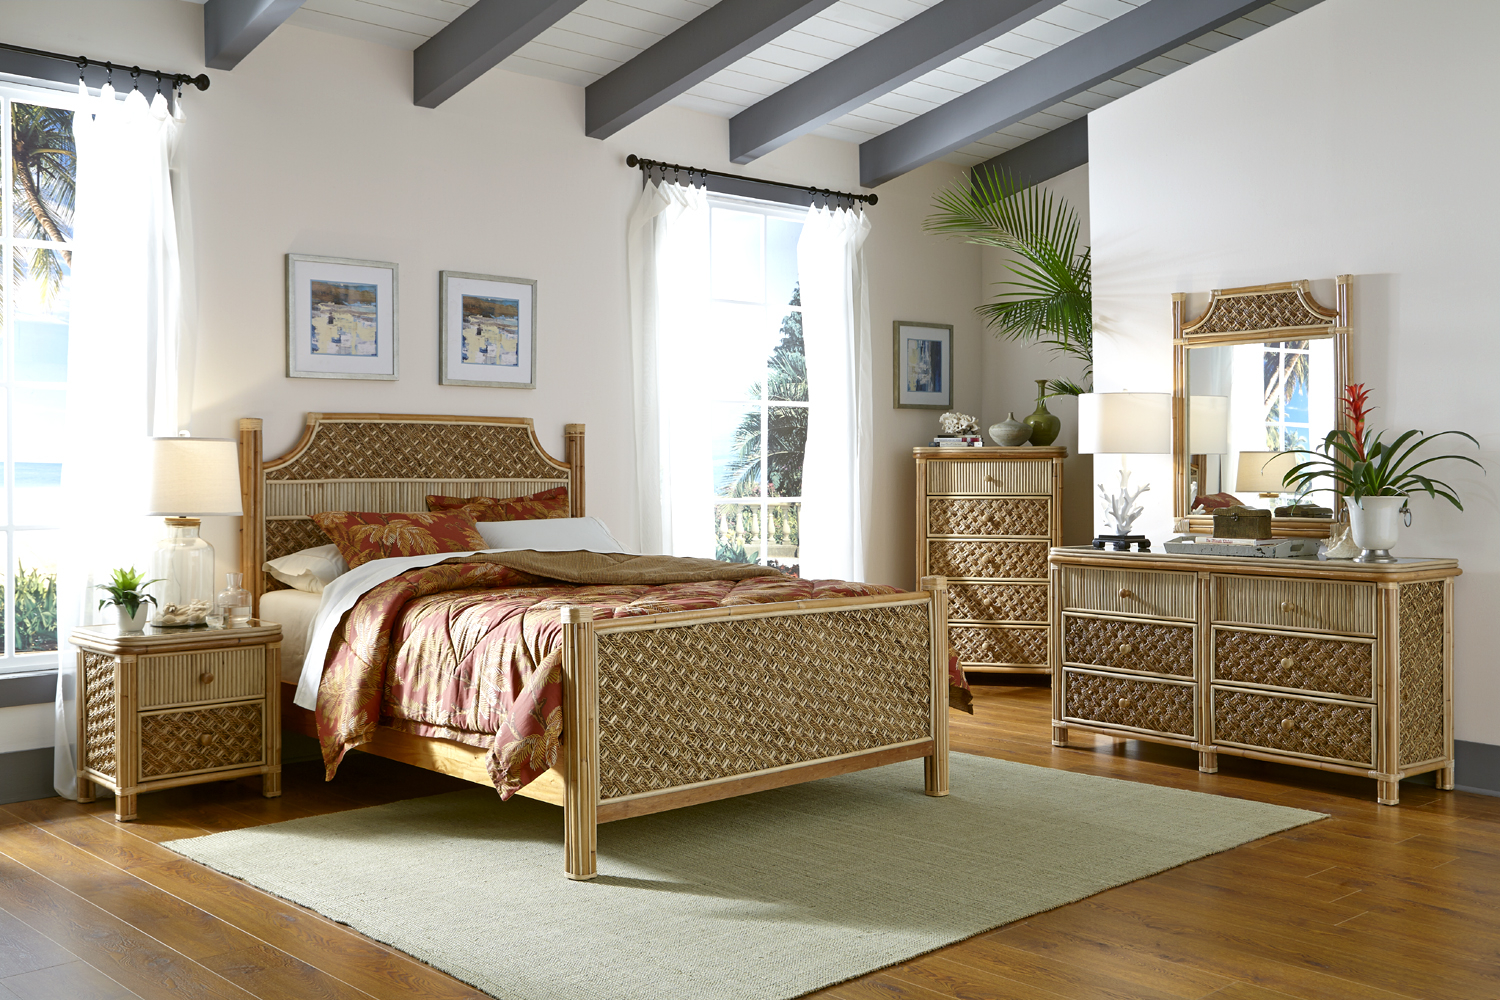 Mandalay Rattan 5 Pc Bedroom King Furniture Set Spice Island Wicker in proportions 1500 X 1000